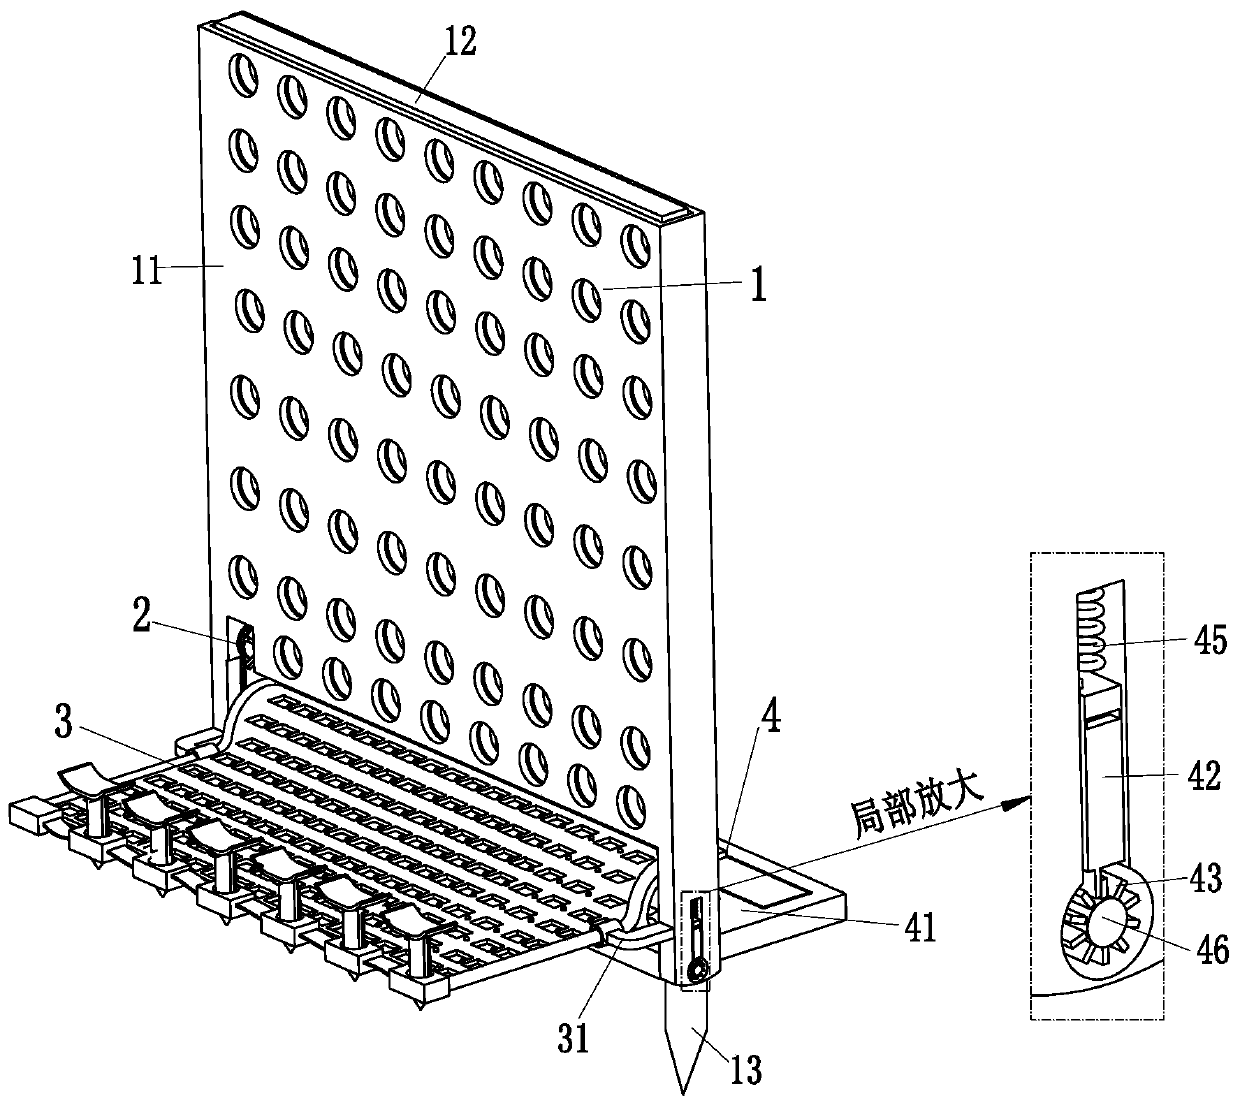 Multi-stage sand blocking device for water and soil conservation